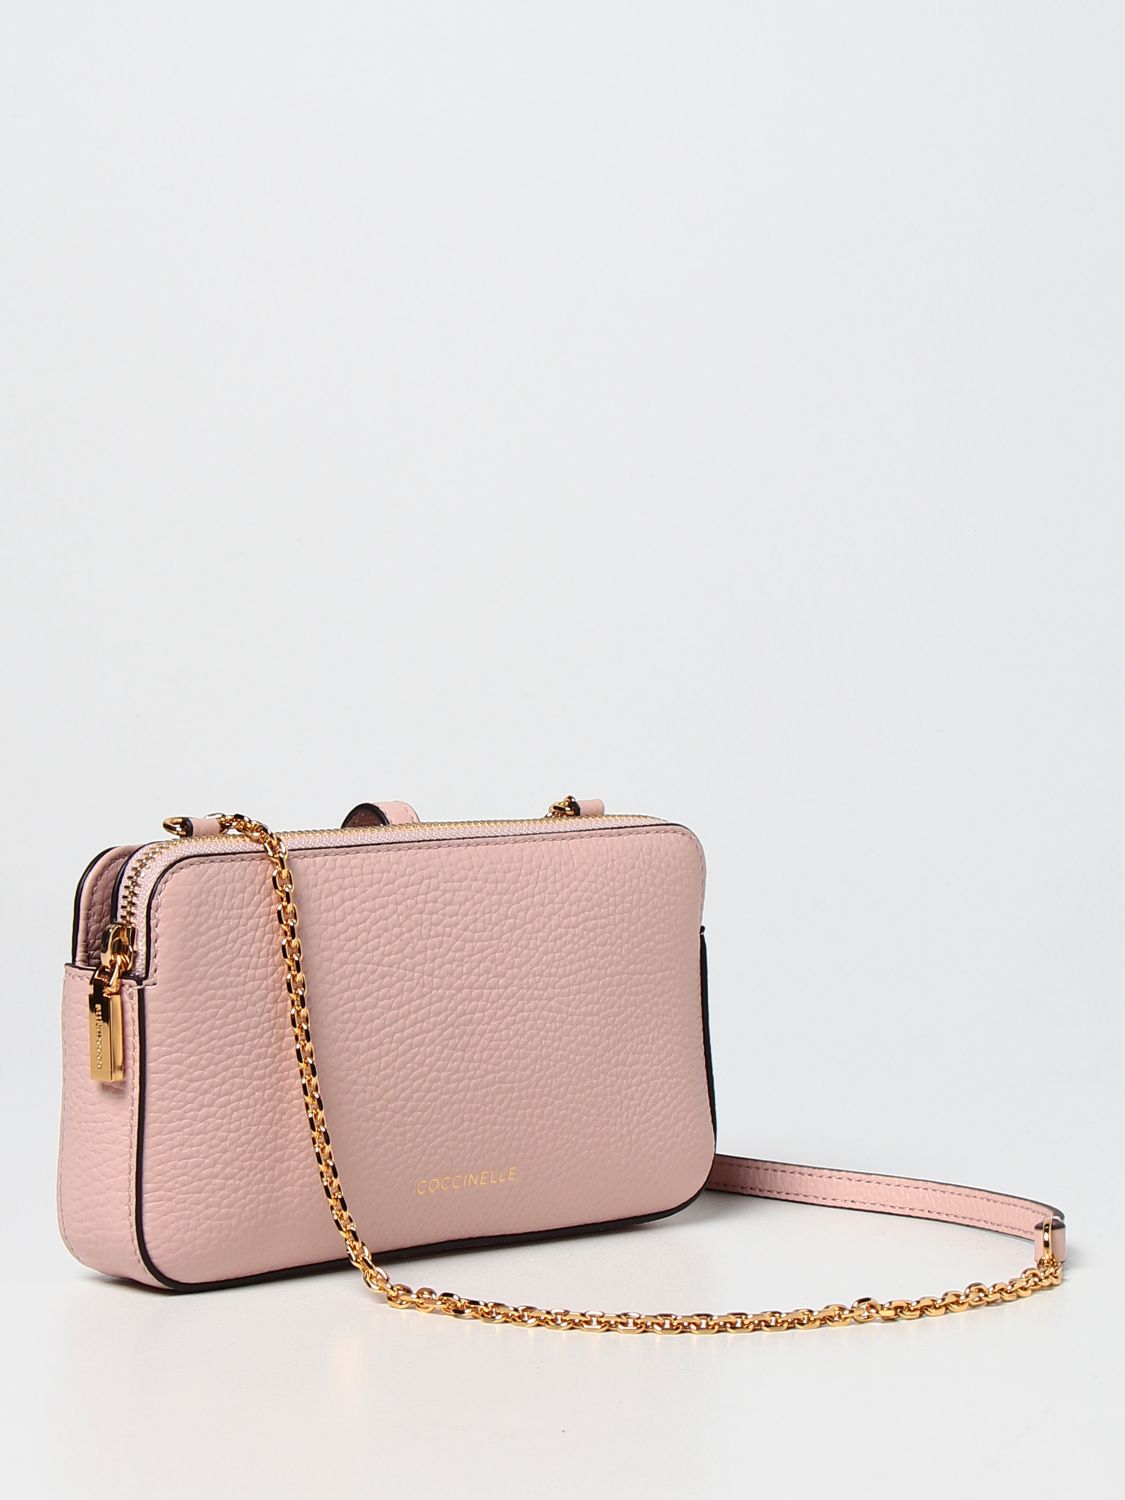 Italy Coccinelle Pink Leather Ostrich Skin Like Style Mini 